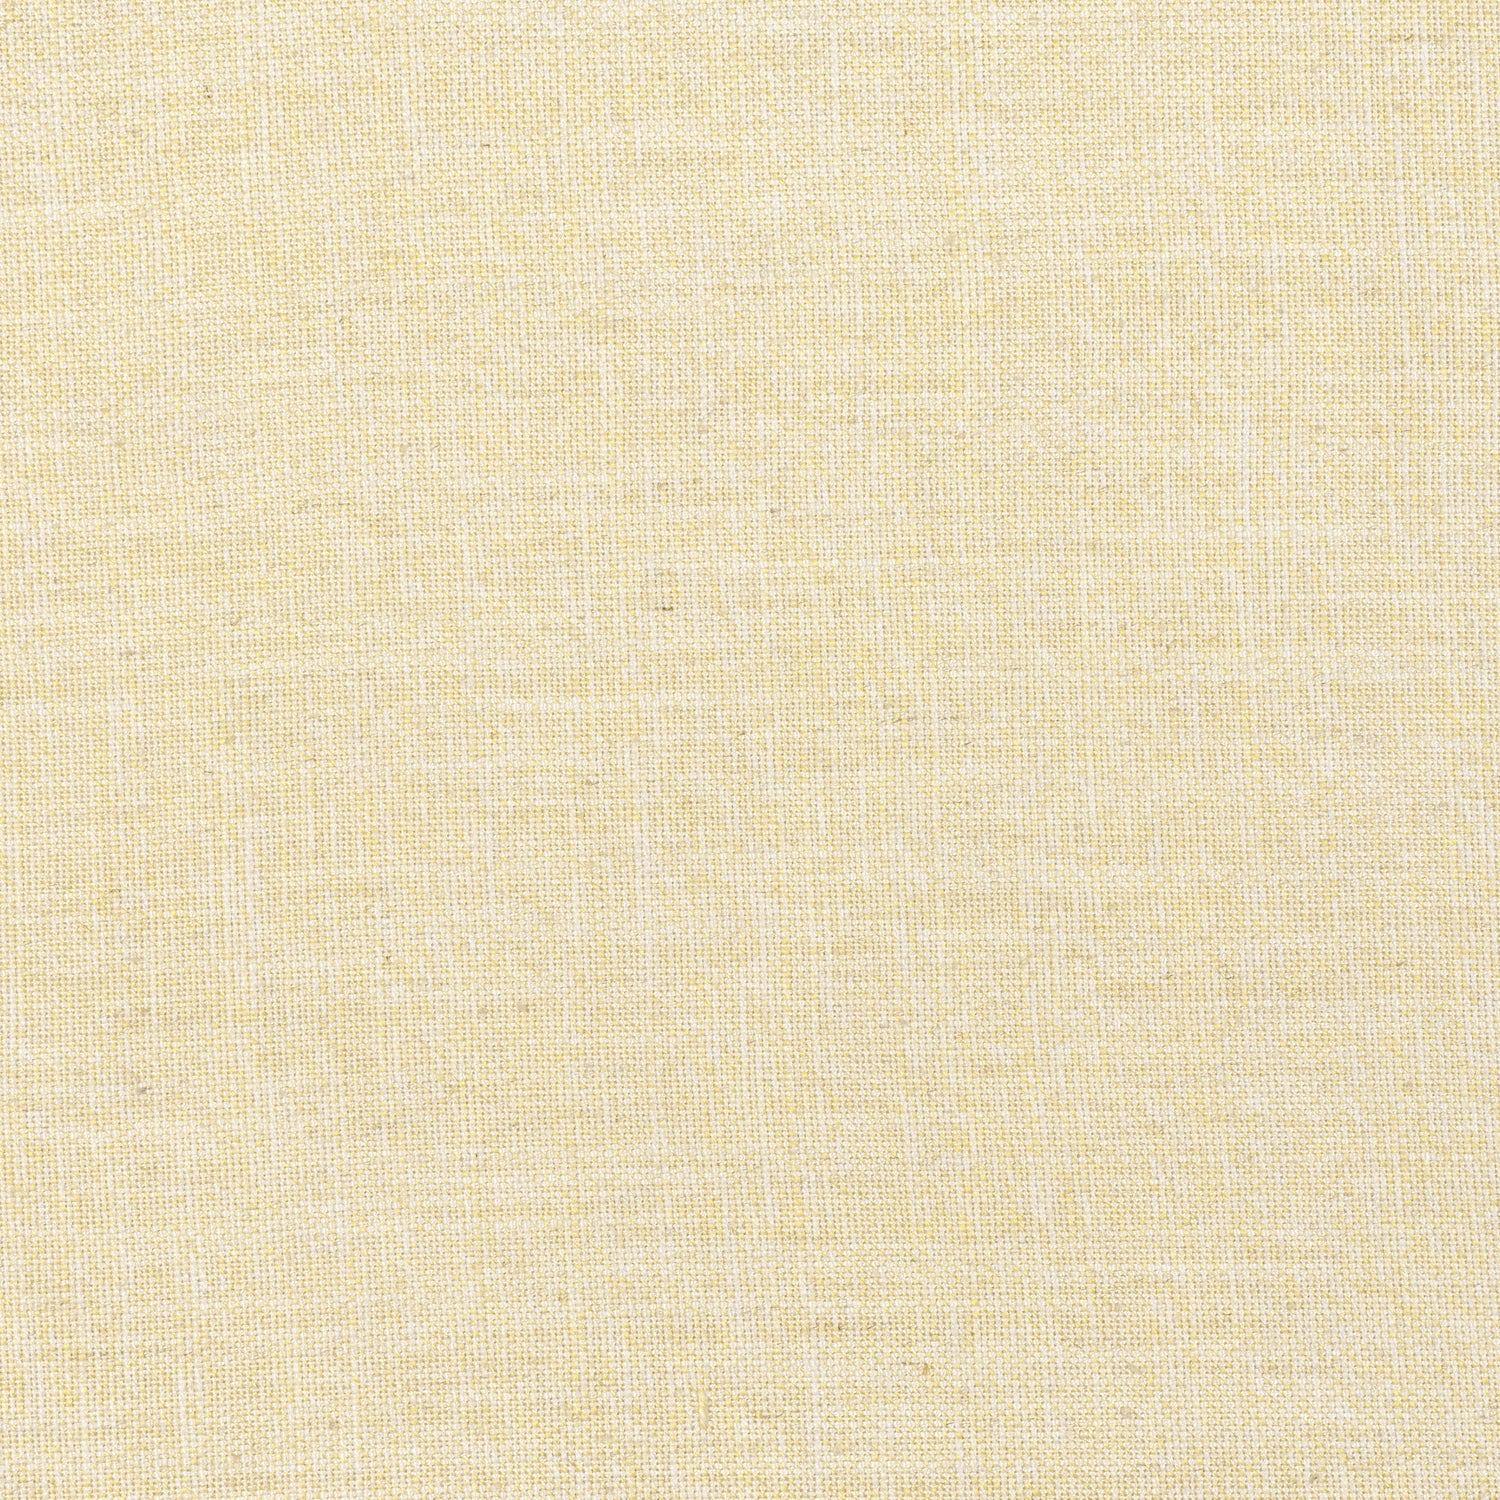 Terra Linen fabric in straw color - pattern number FWW7688 - by Thibaut in the Palisades collection